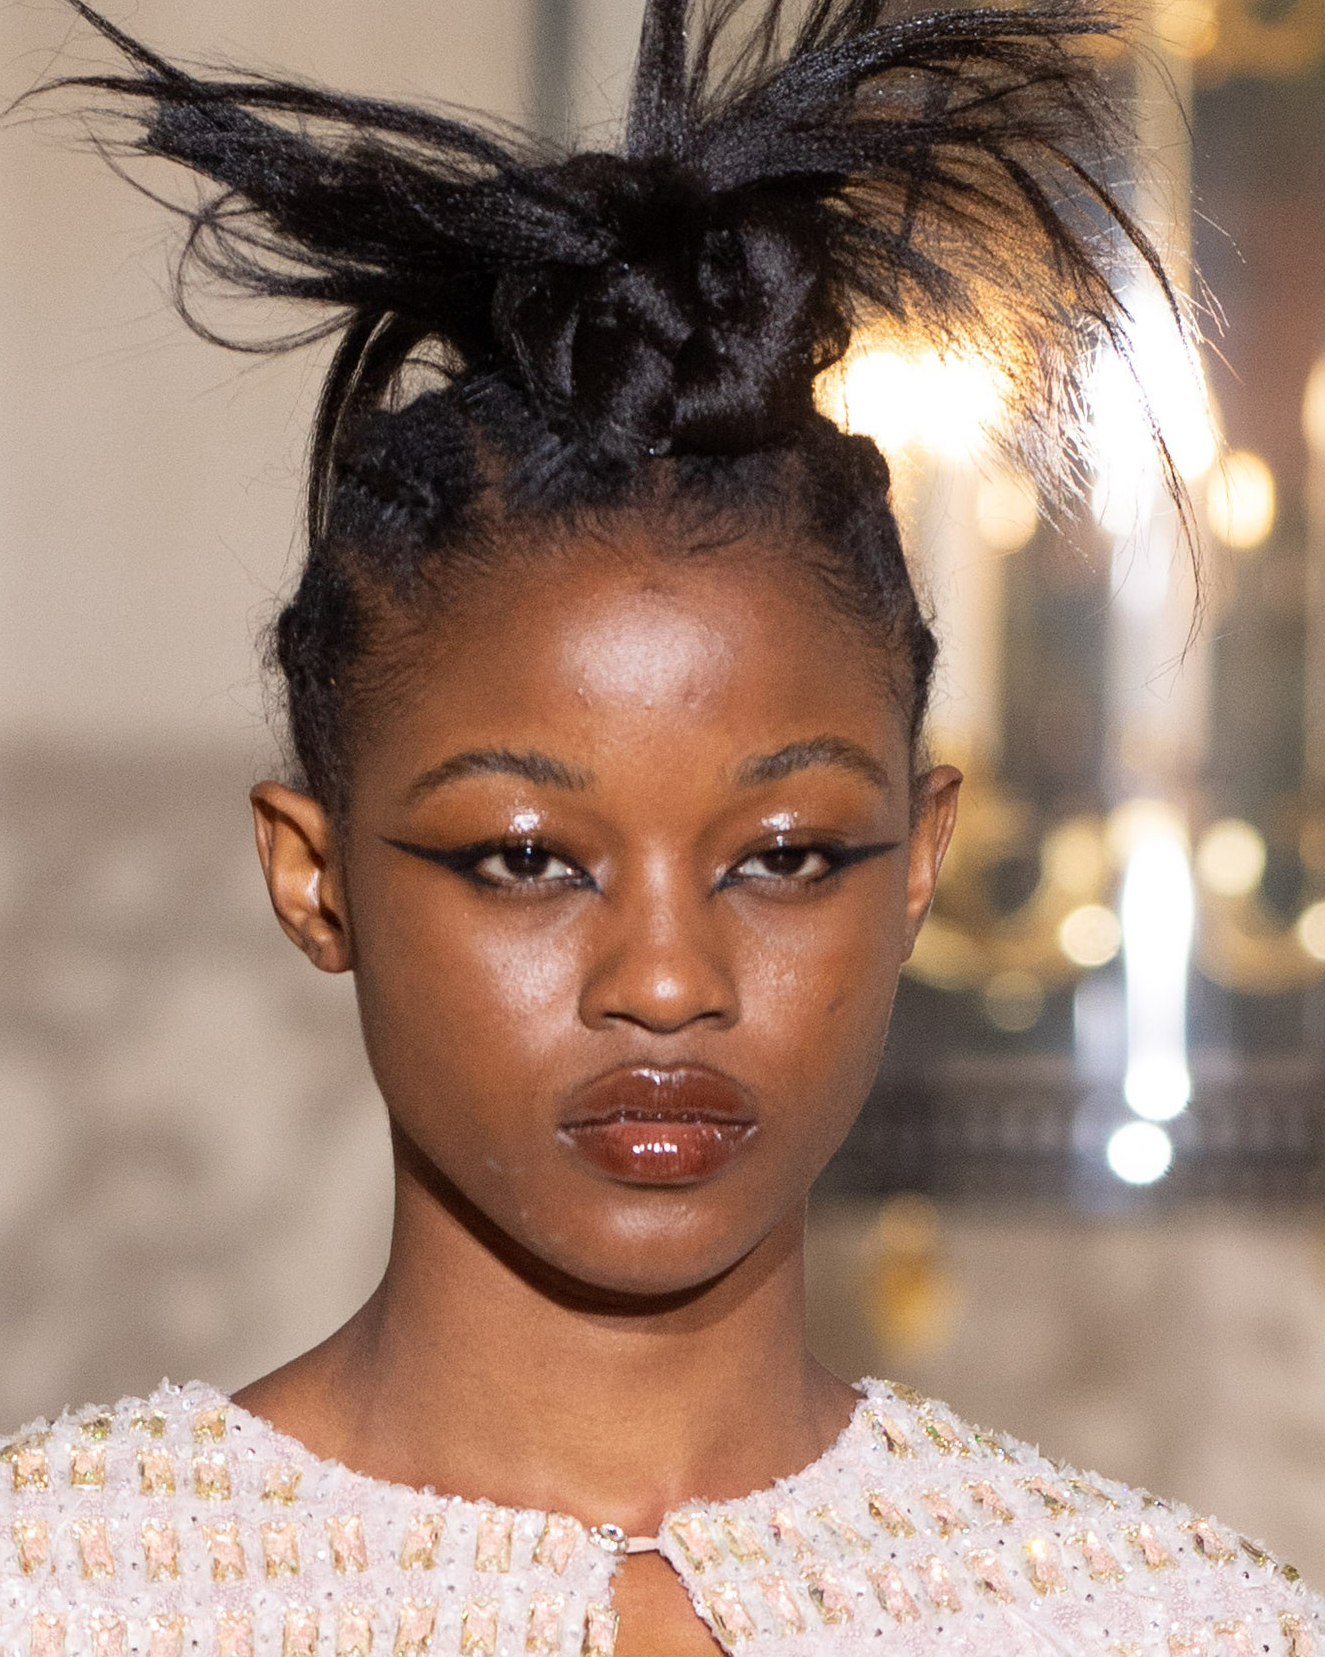 Koche: Spiked Liner and Updo